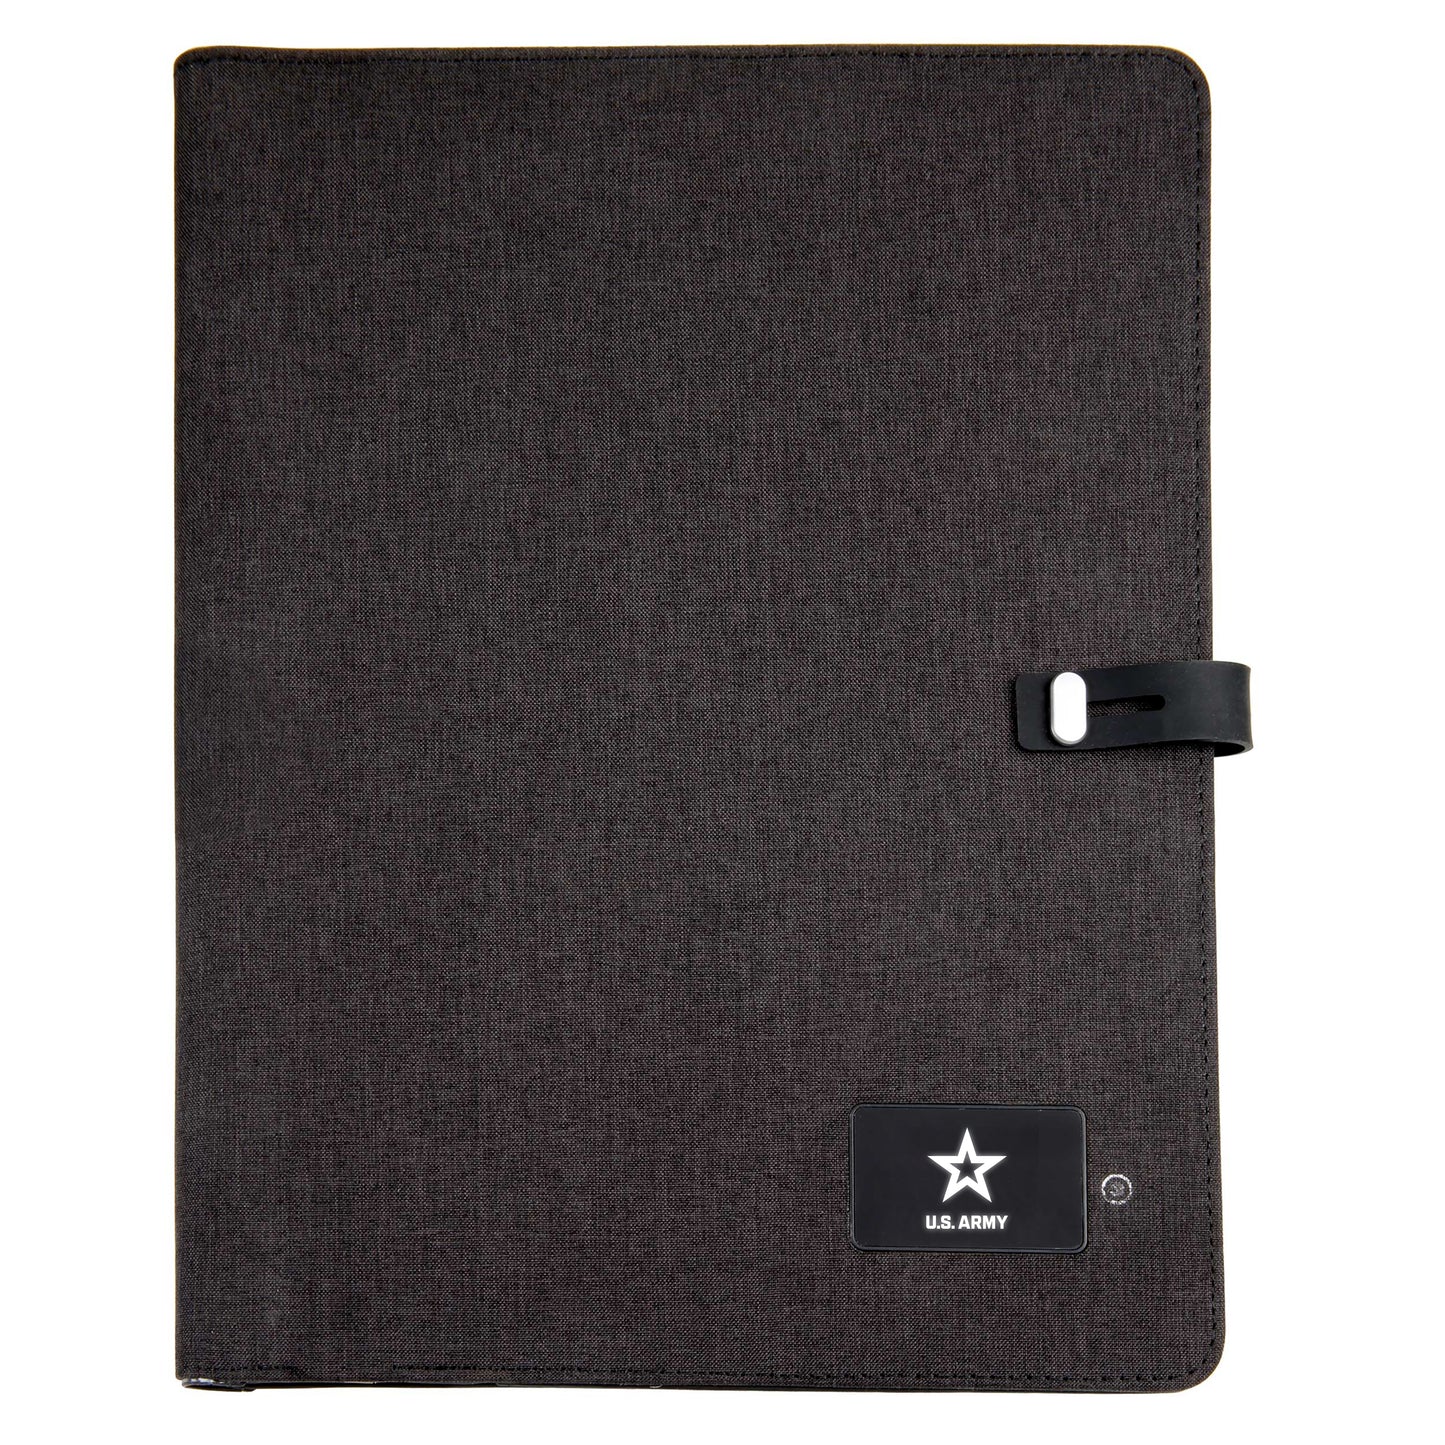 Powerbank Folder with USB Port Phone Charger Army Black